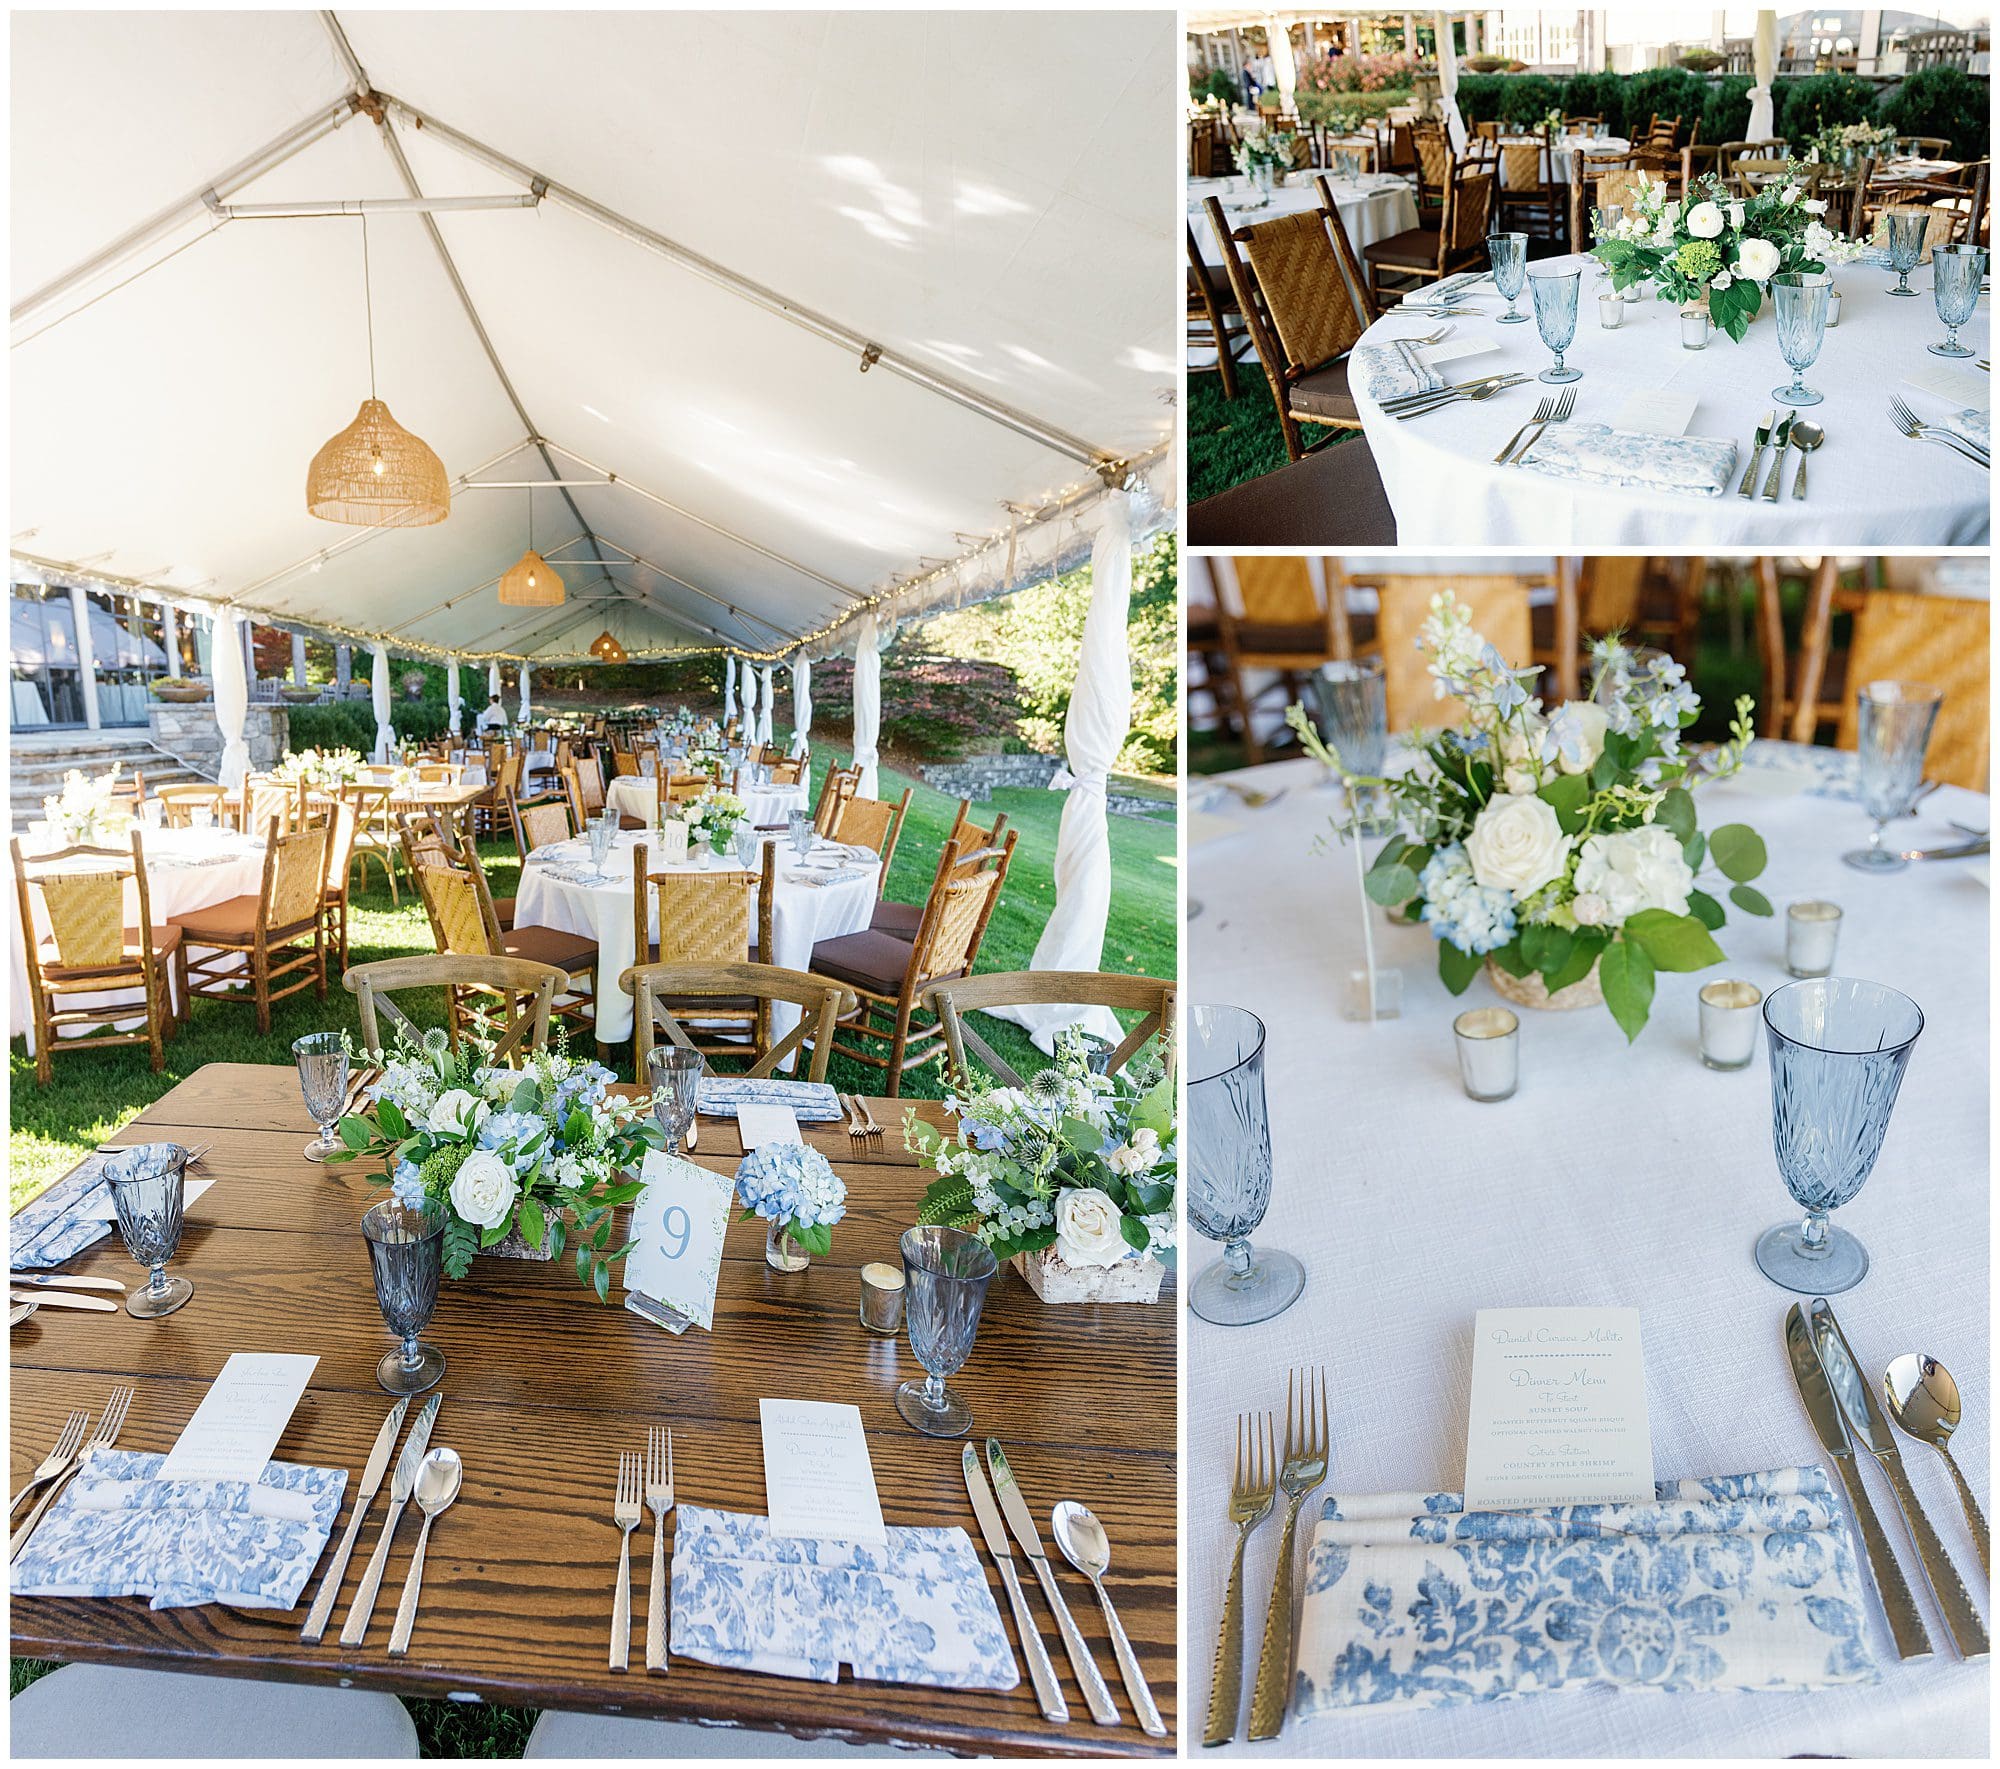 A blue and white wedding reception set up in a tent.